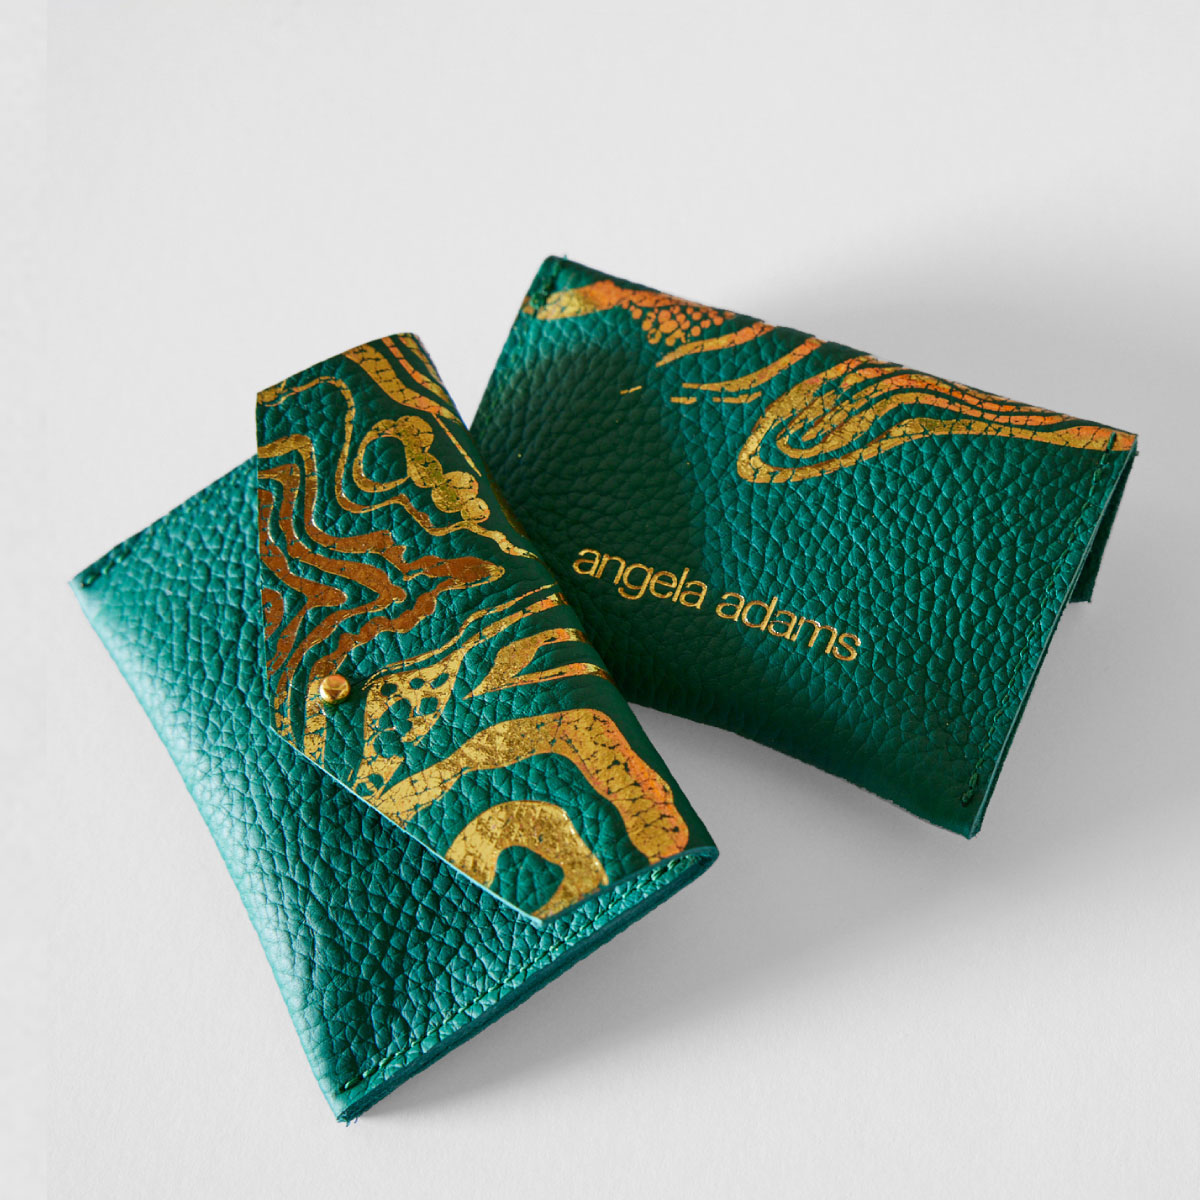 A textured green and gold, hand sewn, leather wallet called Nebula Grass by Angela Adams.